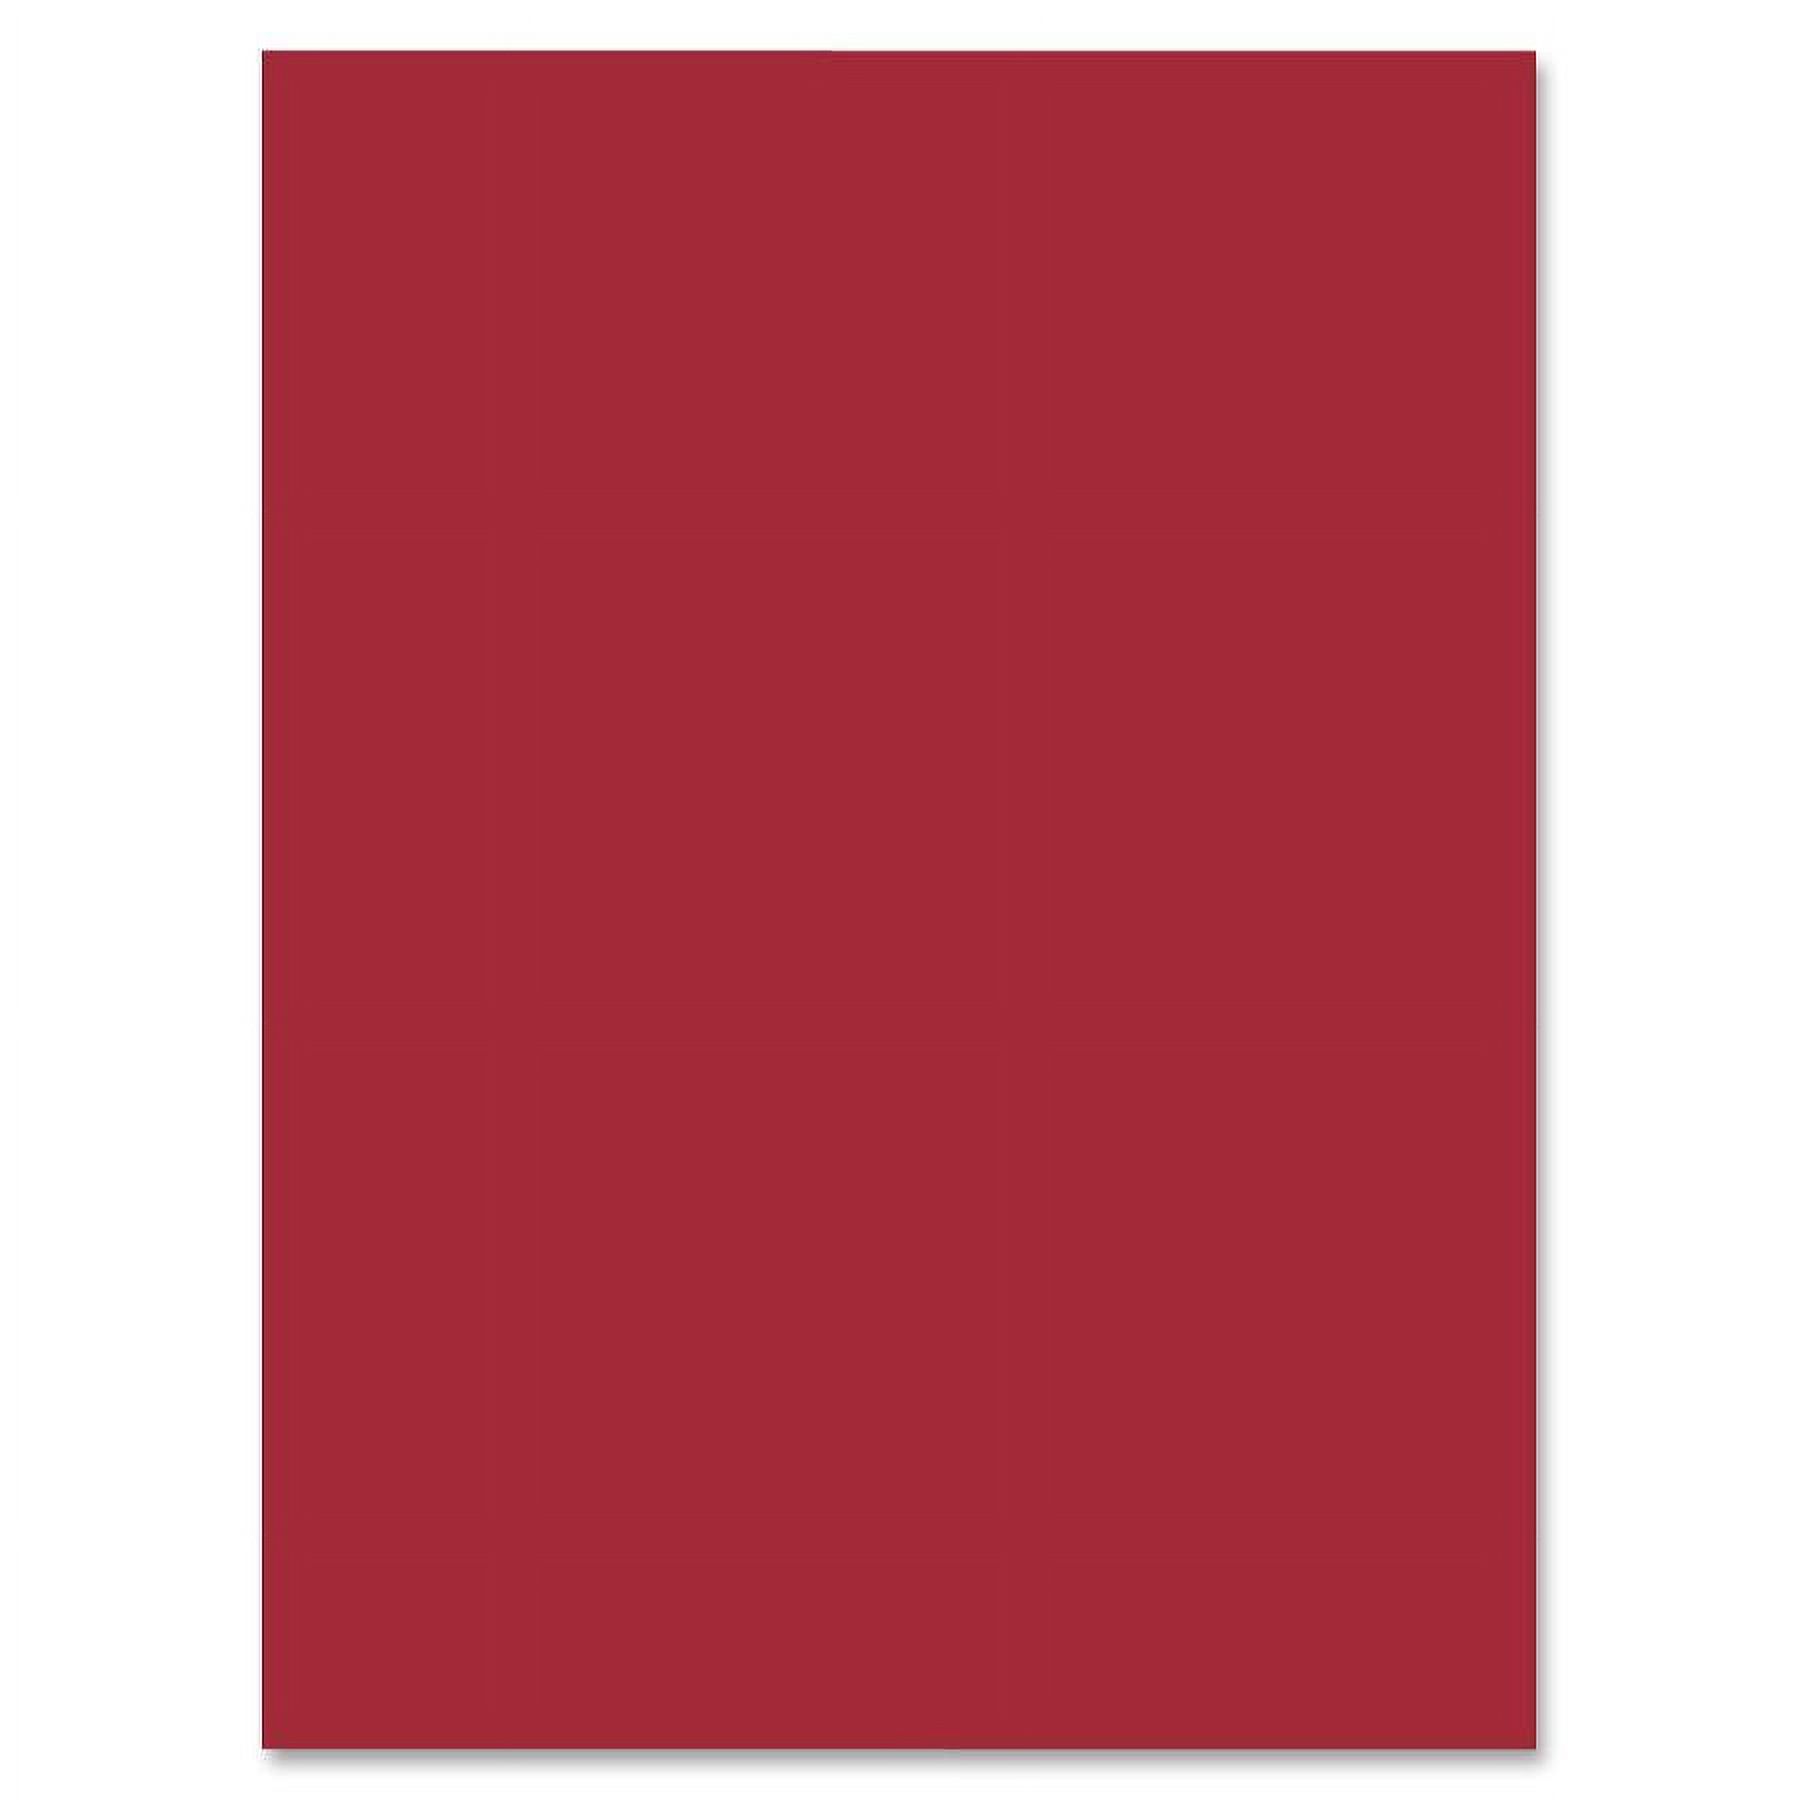 Nature Saver, NAT22327, 100% Recycled Construction Paper, 50 / Pack, Holiday Red - image 1 of 2